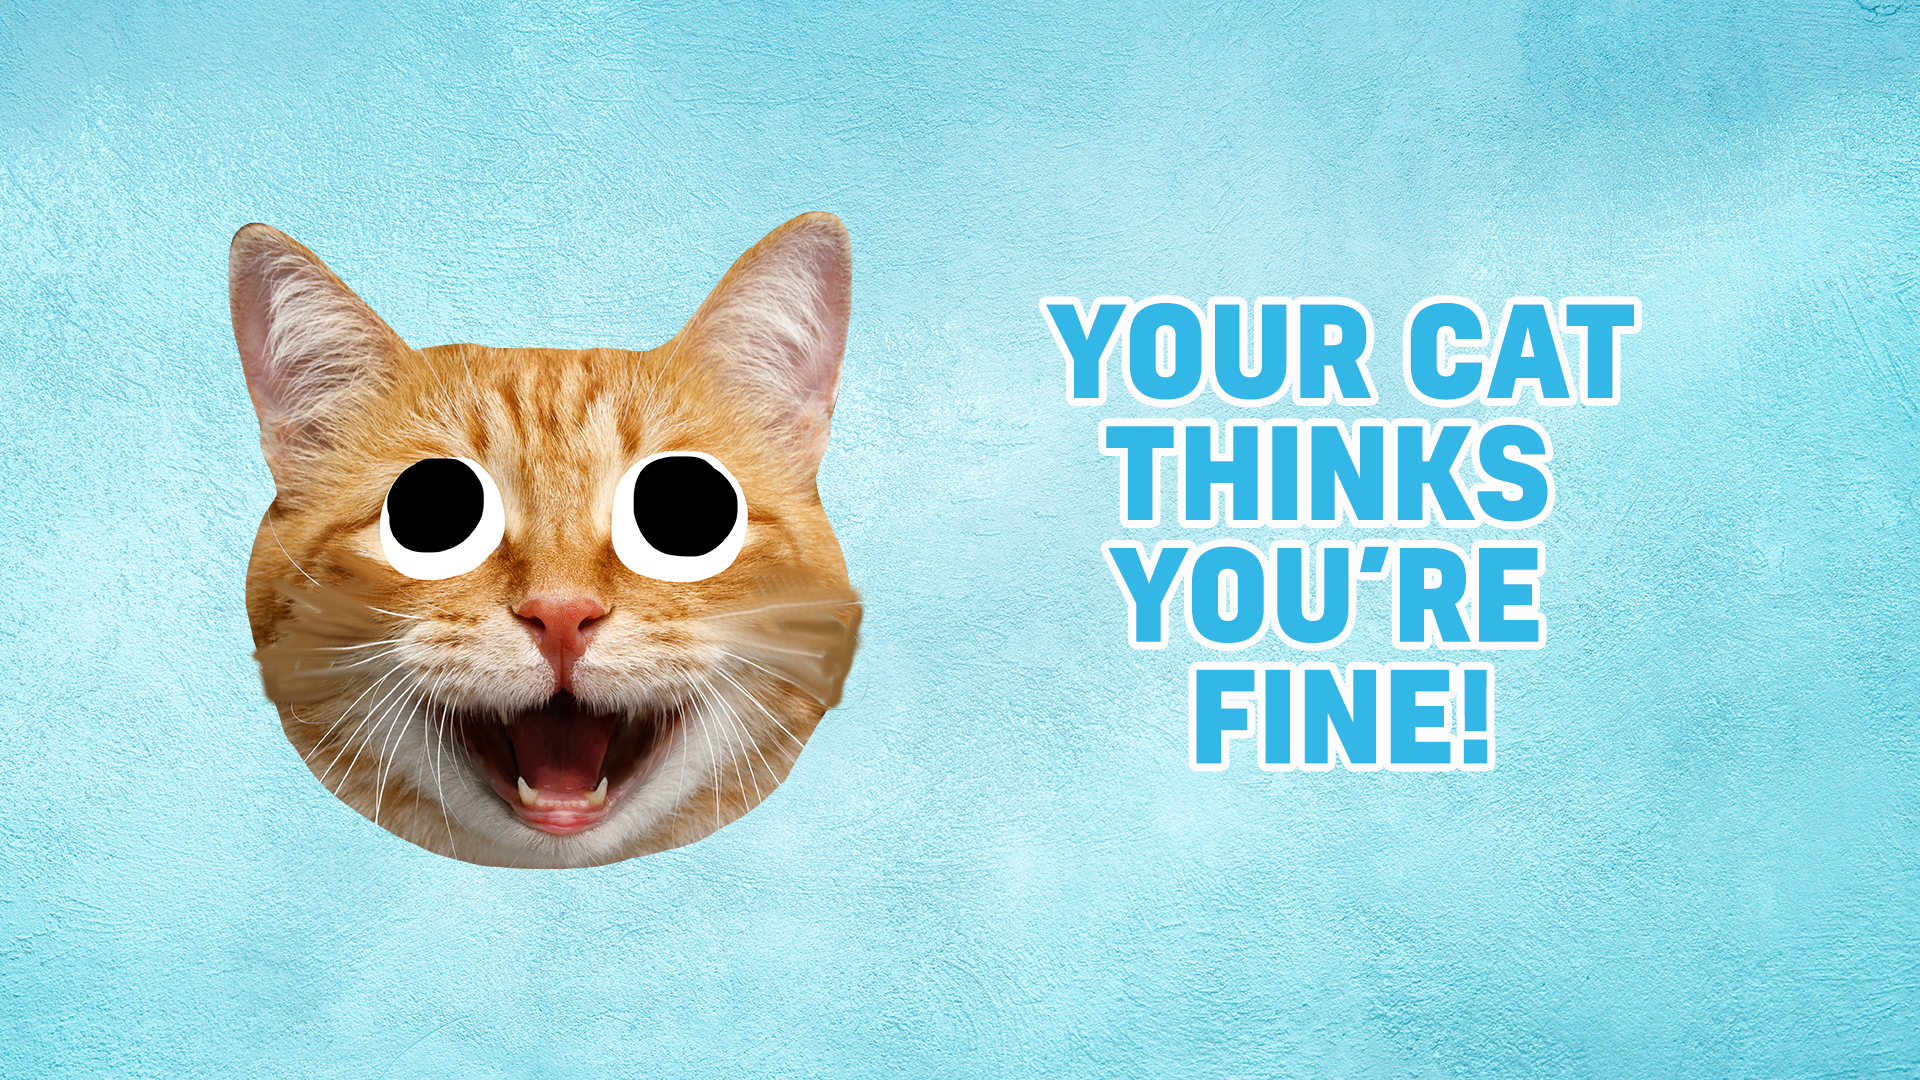 Result: Your cat thinks you're fine!